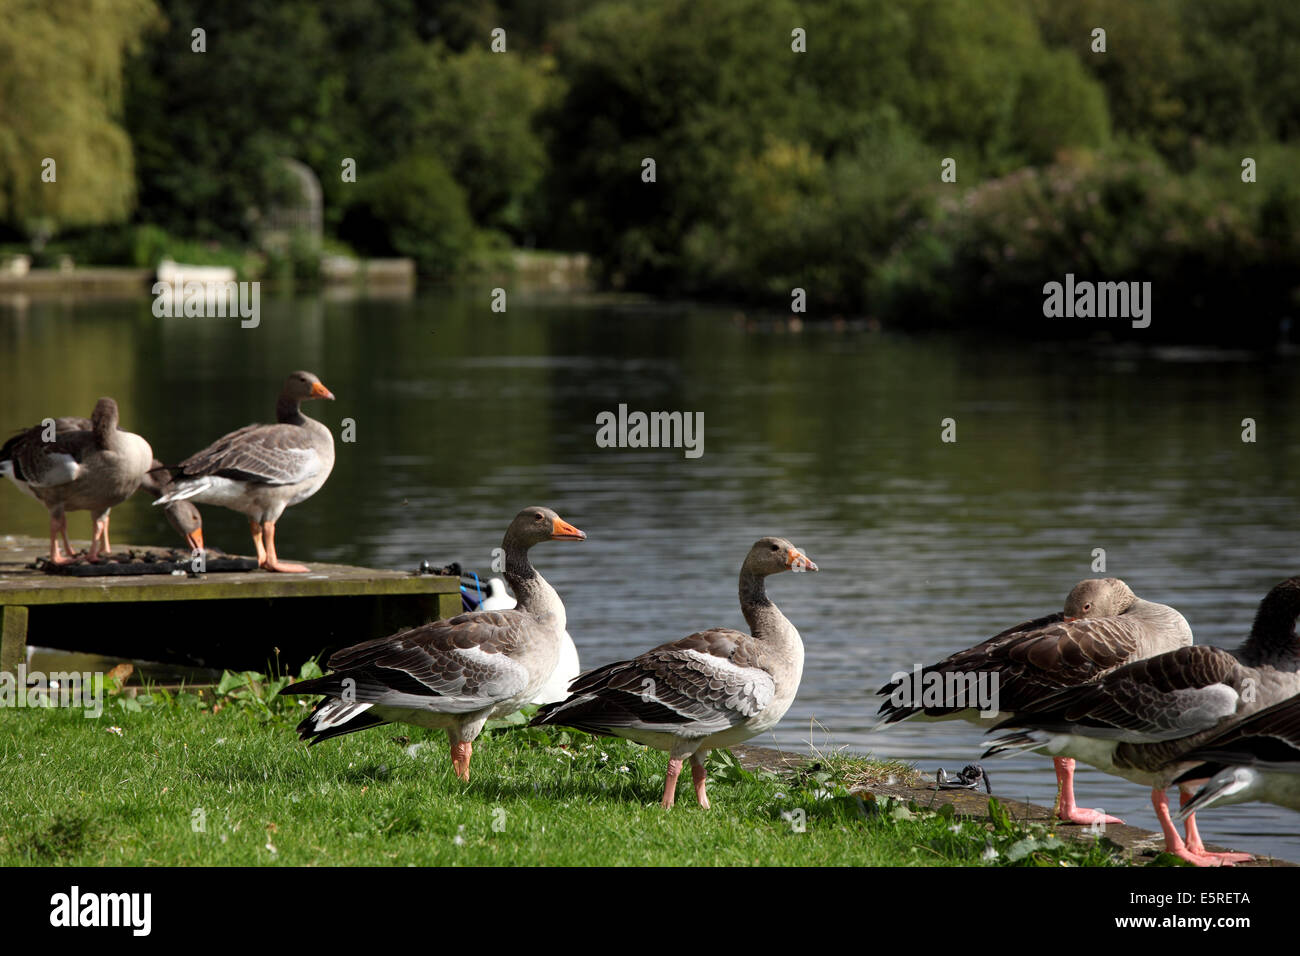 Coltishall, Norfolk, UK 4th August 2014. Weather: Geese stand & sit on the banks of the River Buer at Coltishall, the River Bure runs all the way from Coltishall to Gt Yarmouth, around 31 miles away. Credit:  Paul Lilley/Digitalshot/Alamy Live News Stock Photo